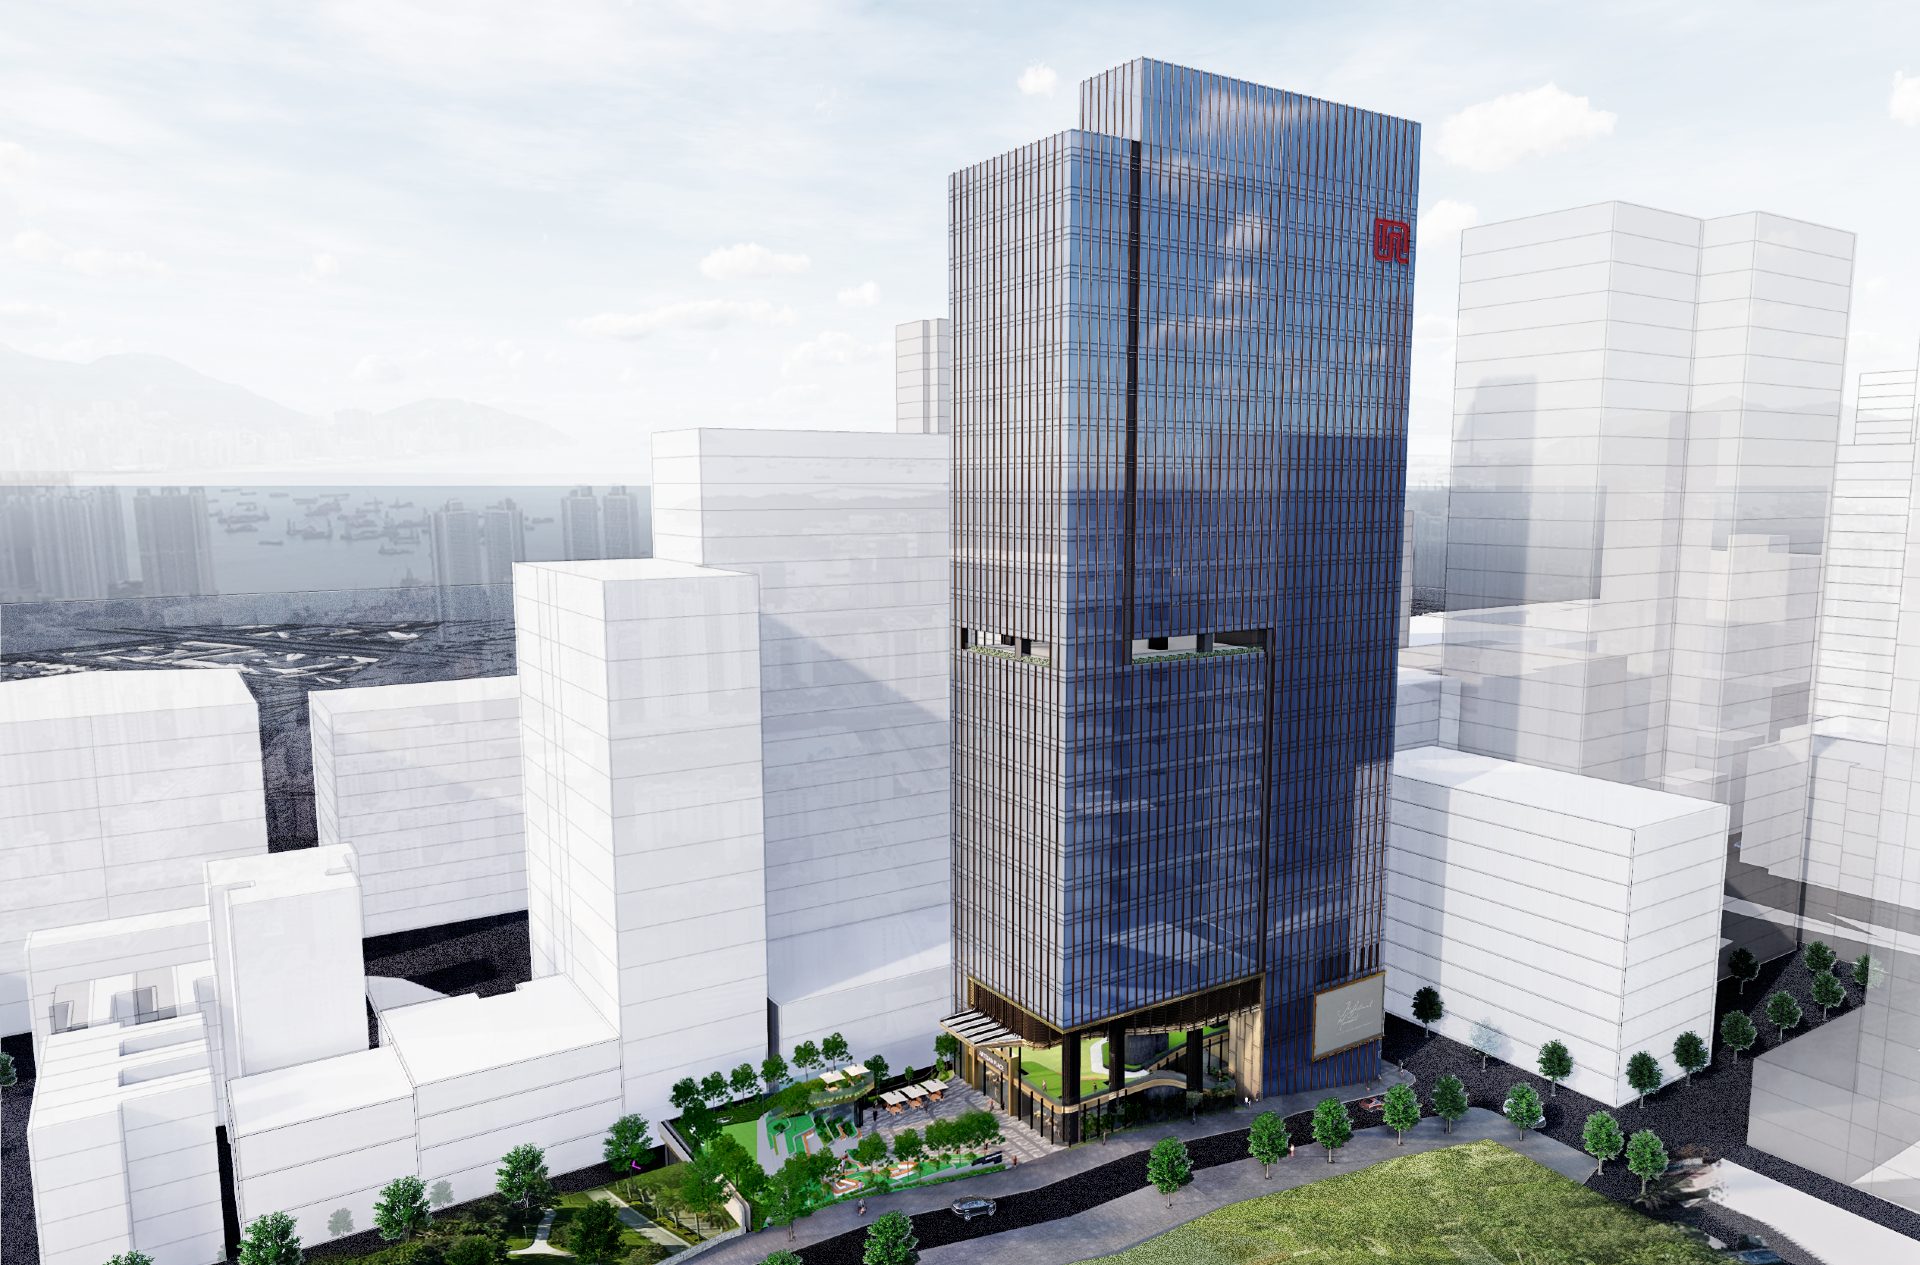 Ares SSG acquires majority stake in HK commercial project for $392m